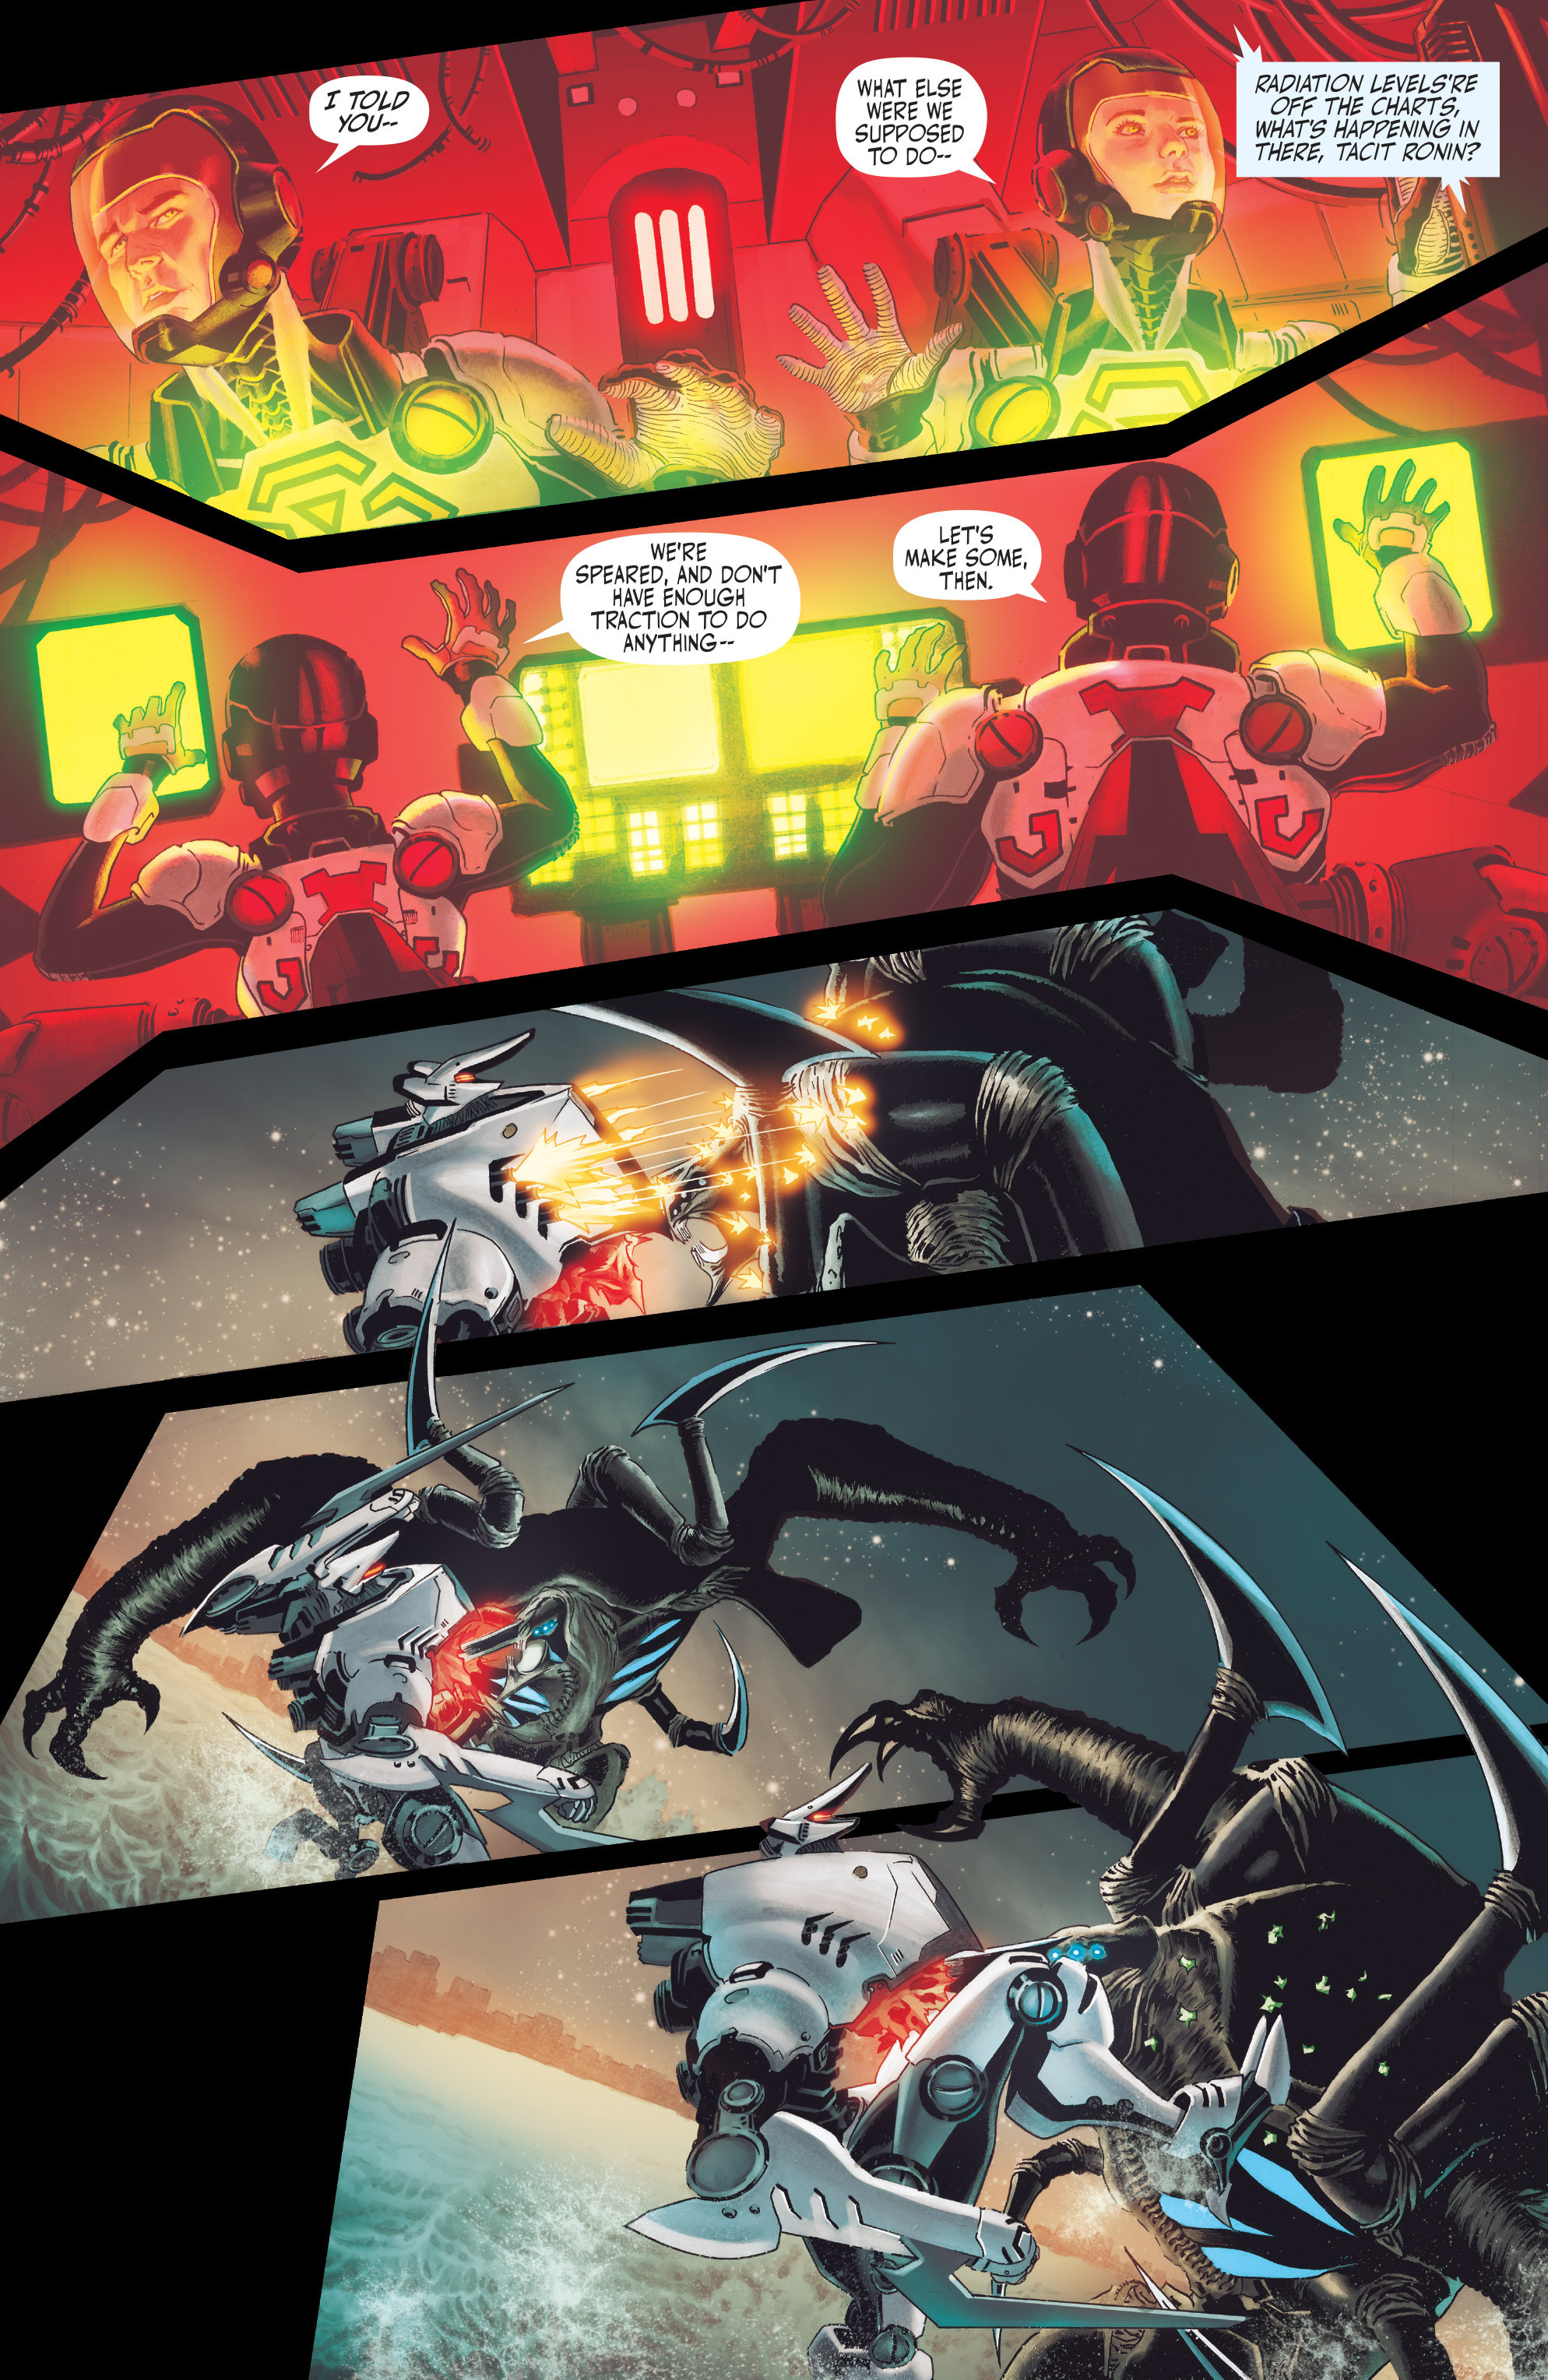 Pacific Rim Tales From The Drift Issue 1 | Read Pacific Rim Tales From The  Drift Issue 1 comic online in high quality. Read Full Comic online for free  - Read comics